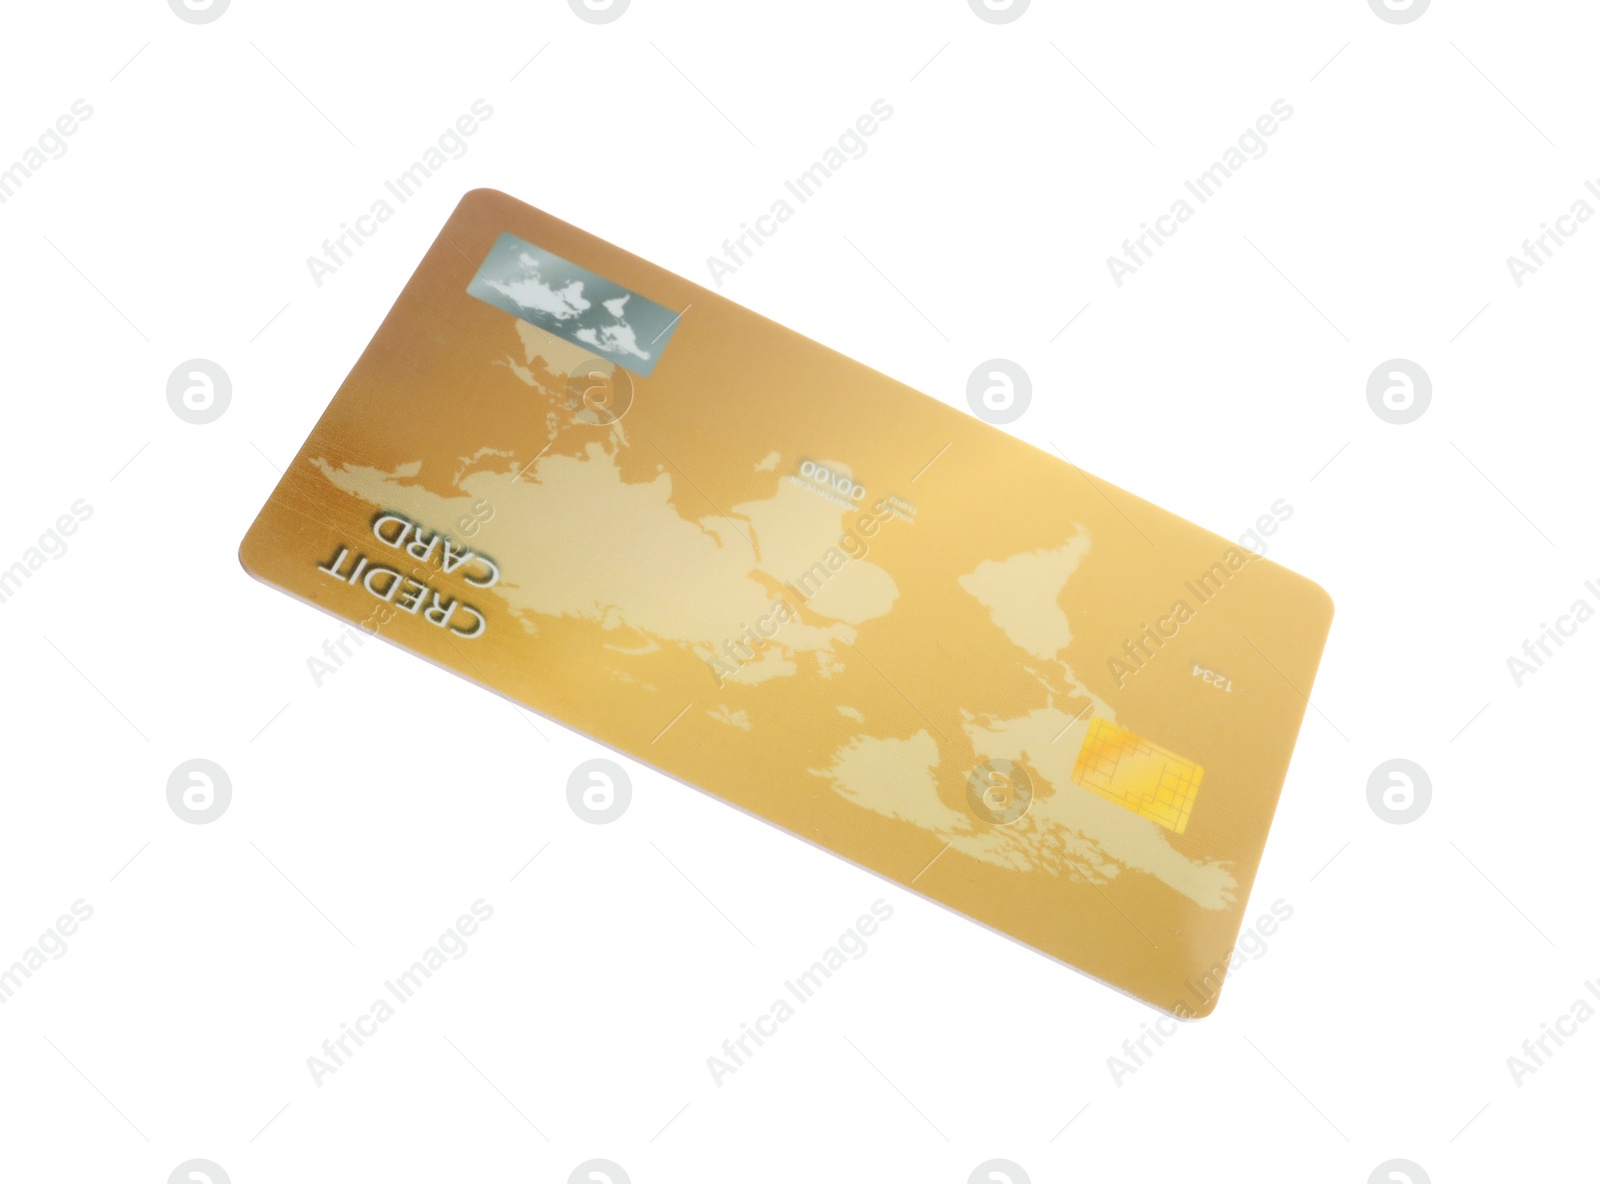 Photo of Golden plastic credit card isolated on white